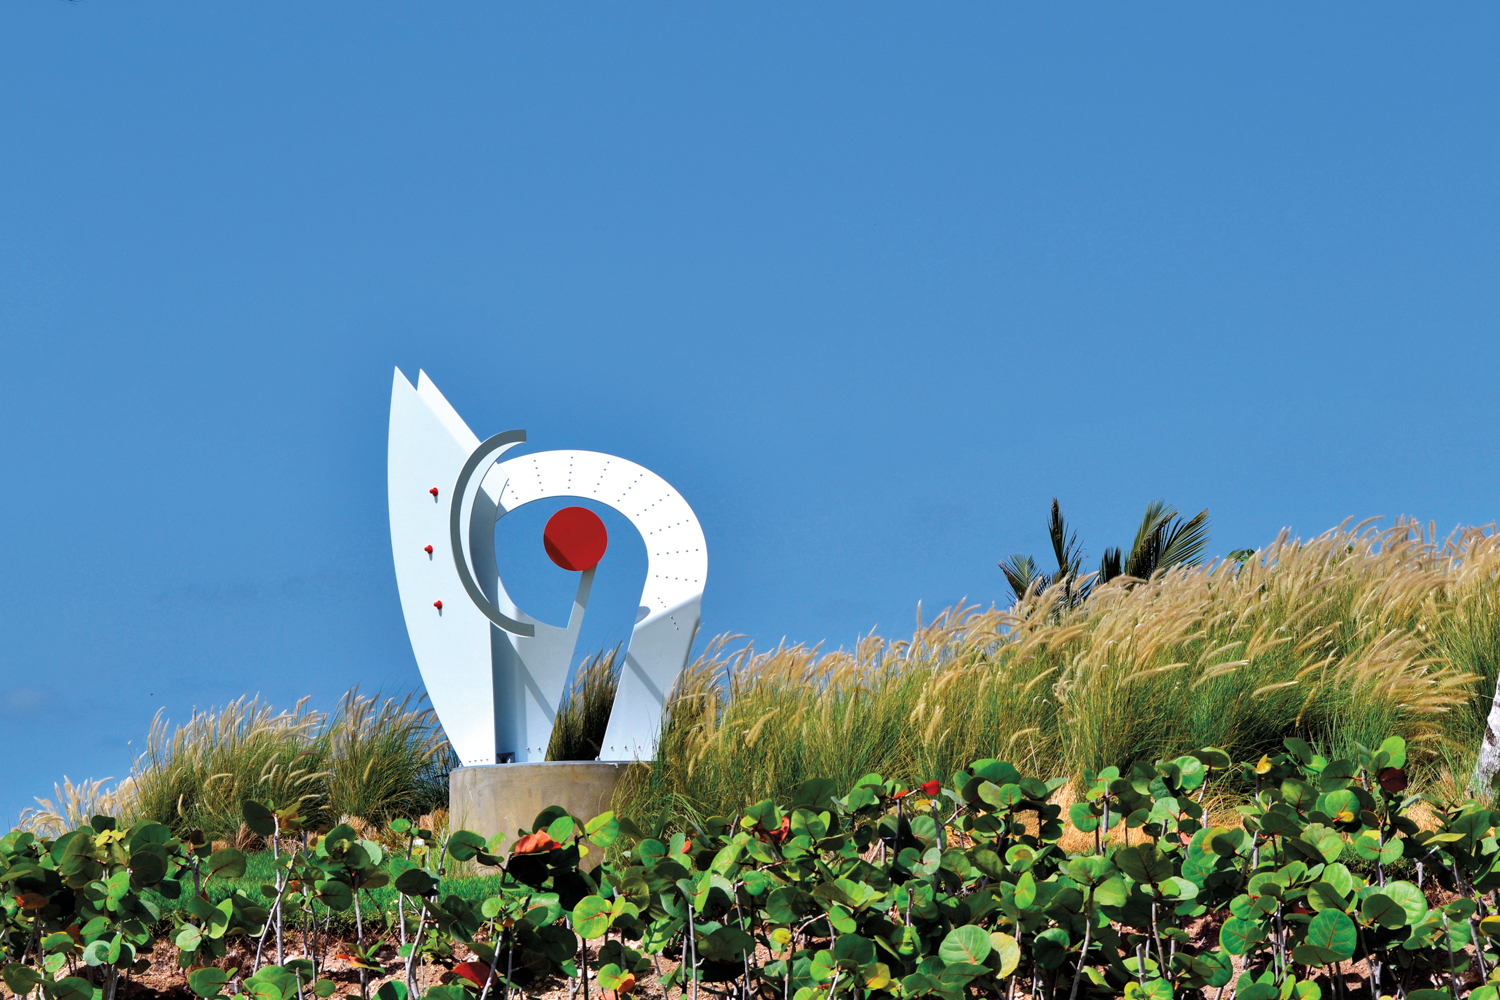 large white aluminum sculpture with red details in the Caribbean by Jorge Blanco